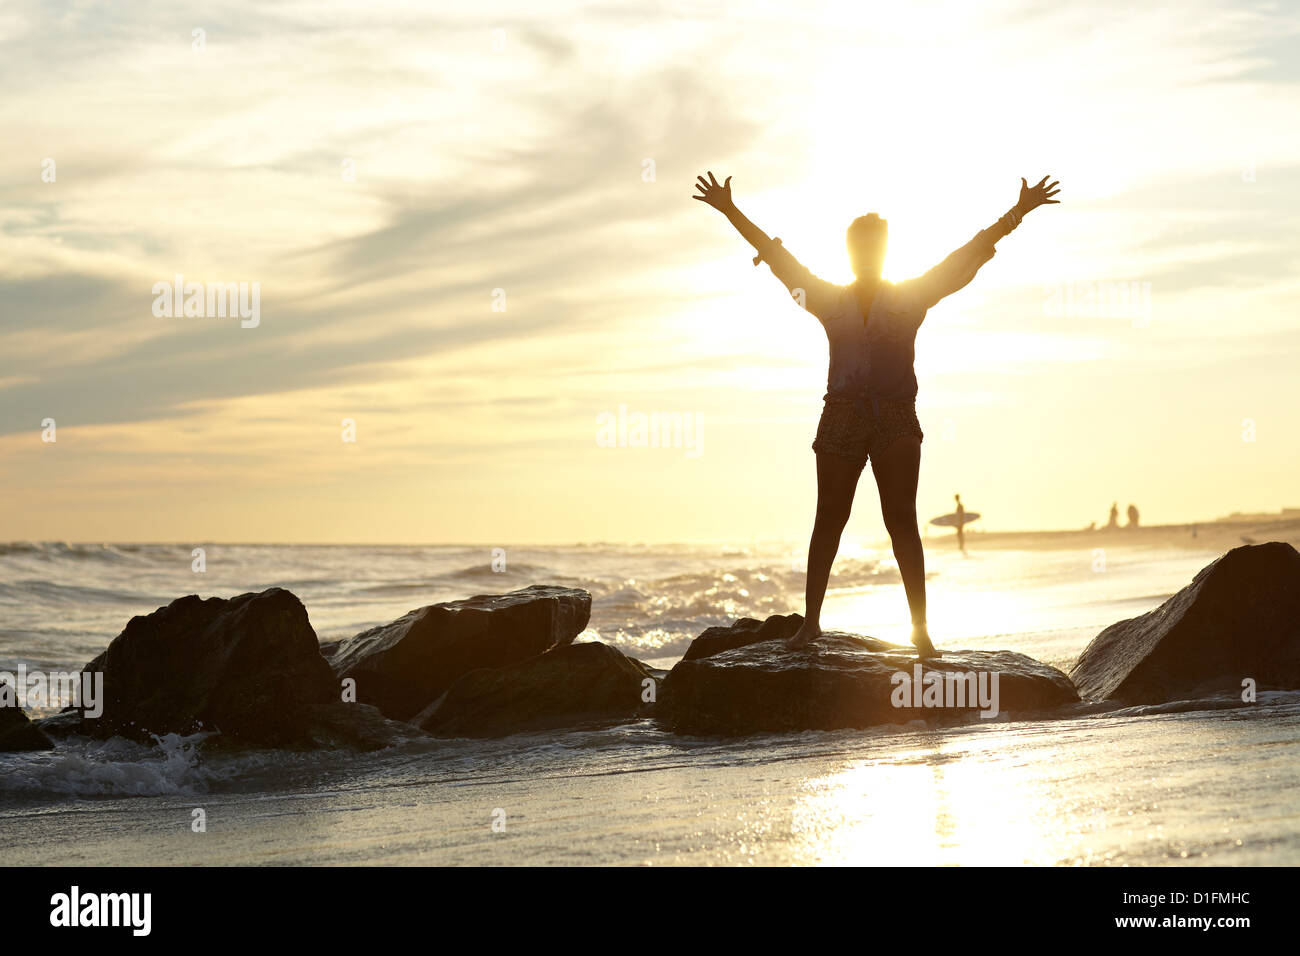 Black woman with arms raised on beach Stock Photo